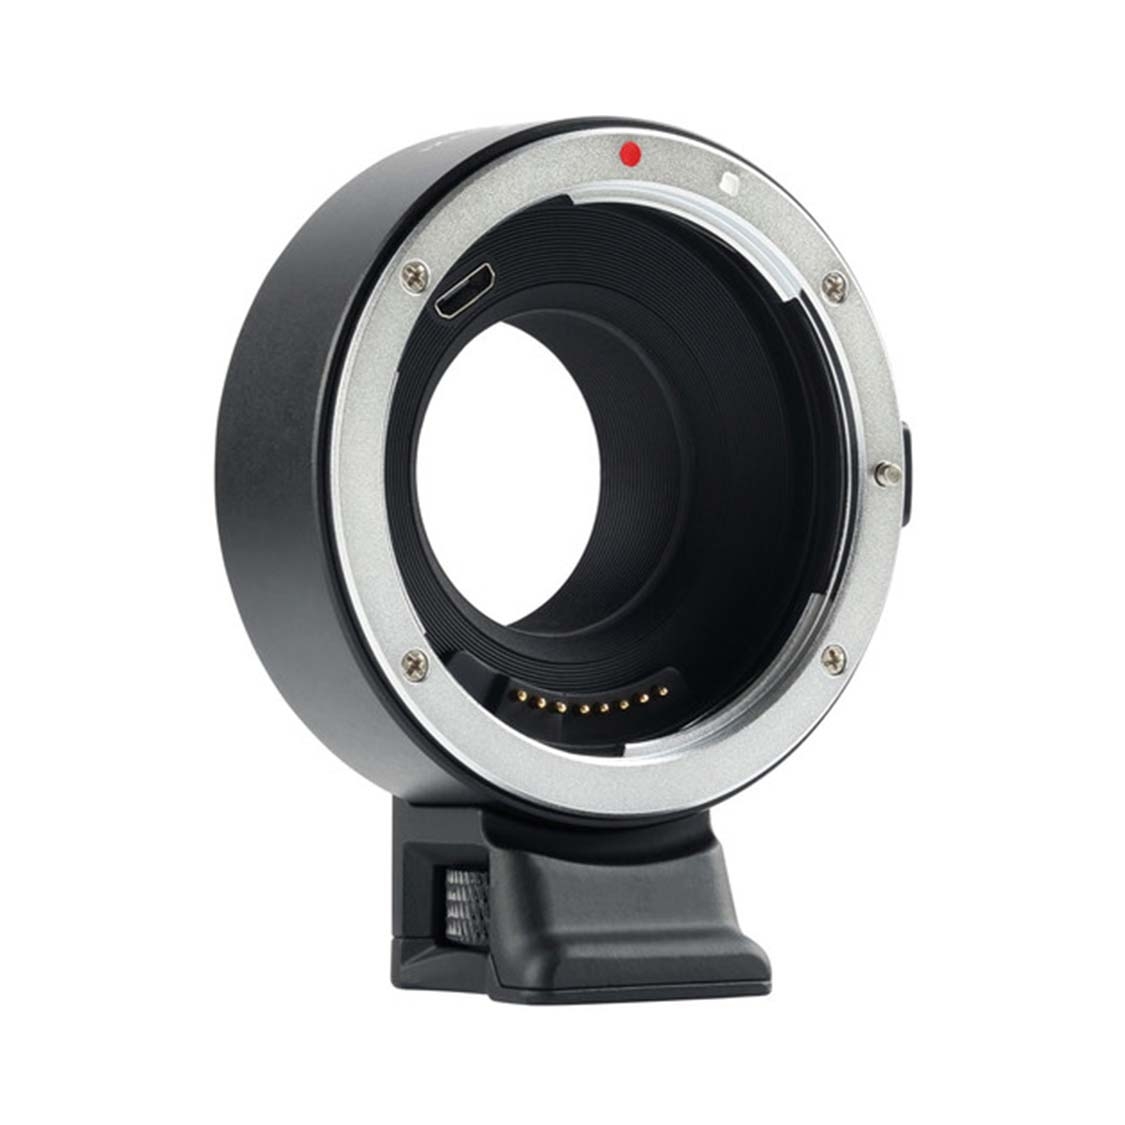 Viltrox EF-FX1 Lens Mount Adapter for Canon EF to Fujifilm X-Mount